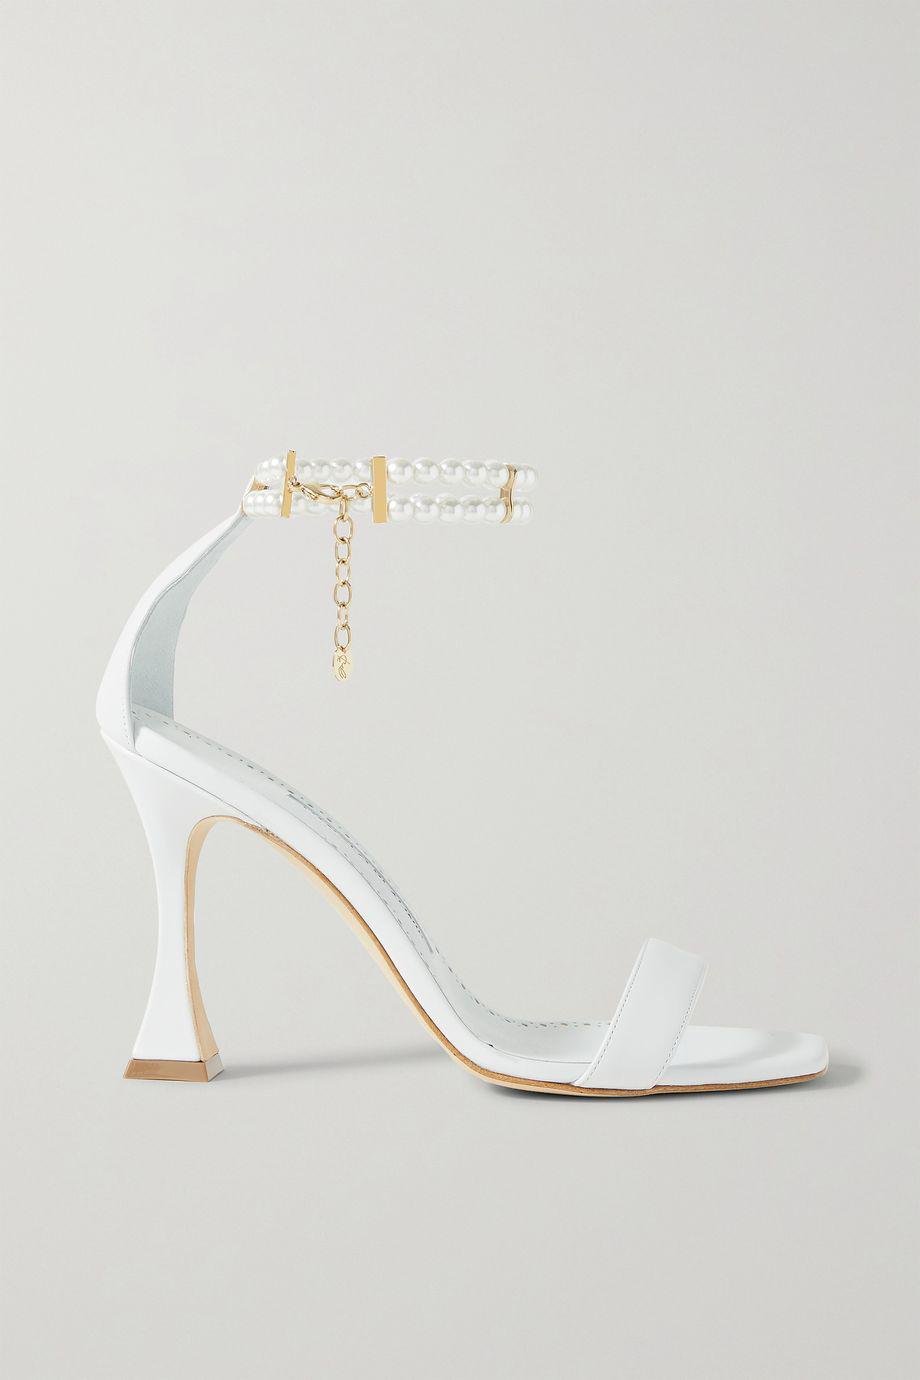 Charona 105 embellished leather sandals by MANOLO BLAHNIK